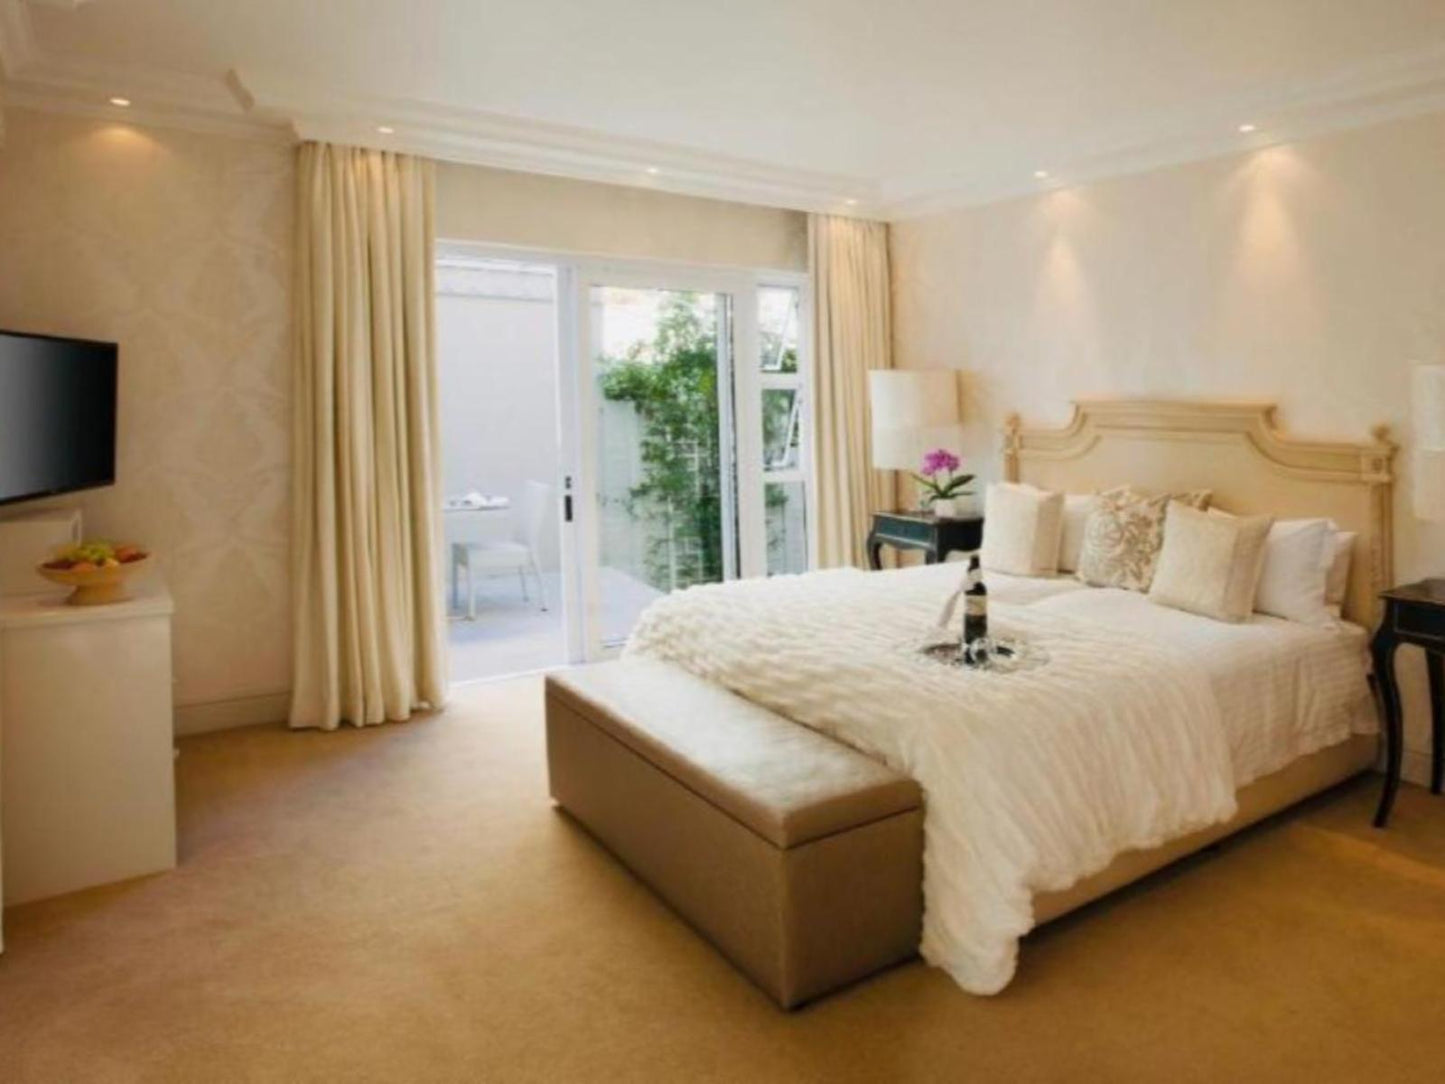 Standard Room @ The Clarendon Bantry Bay